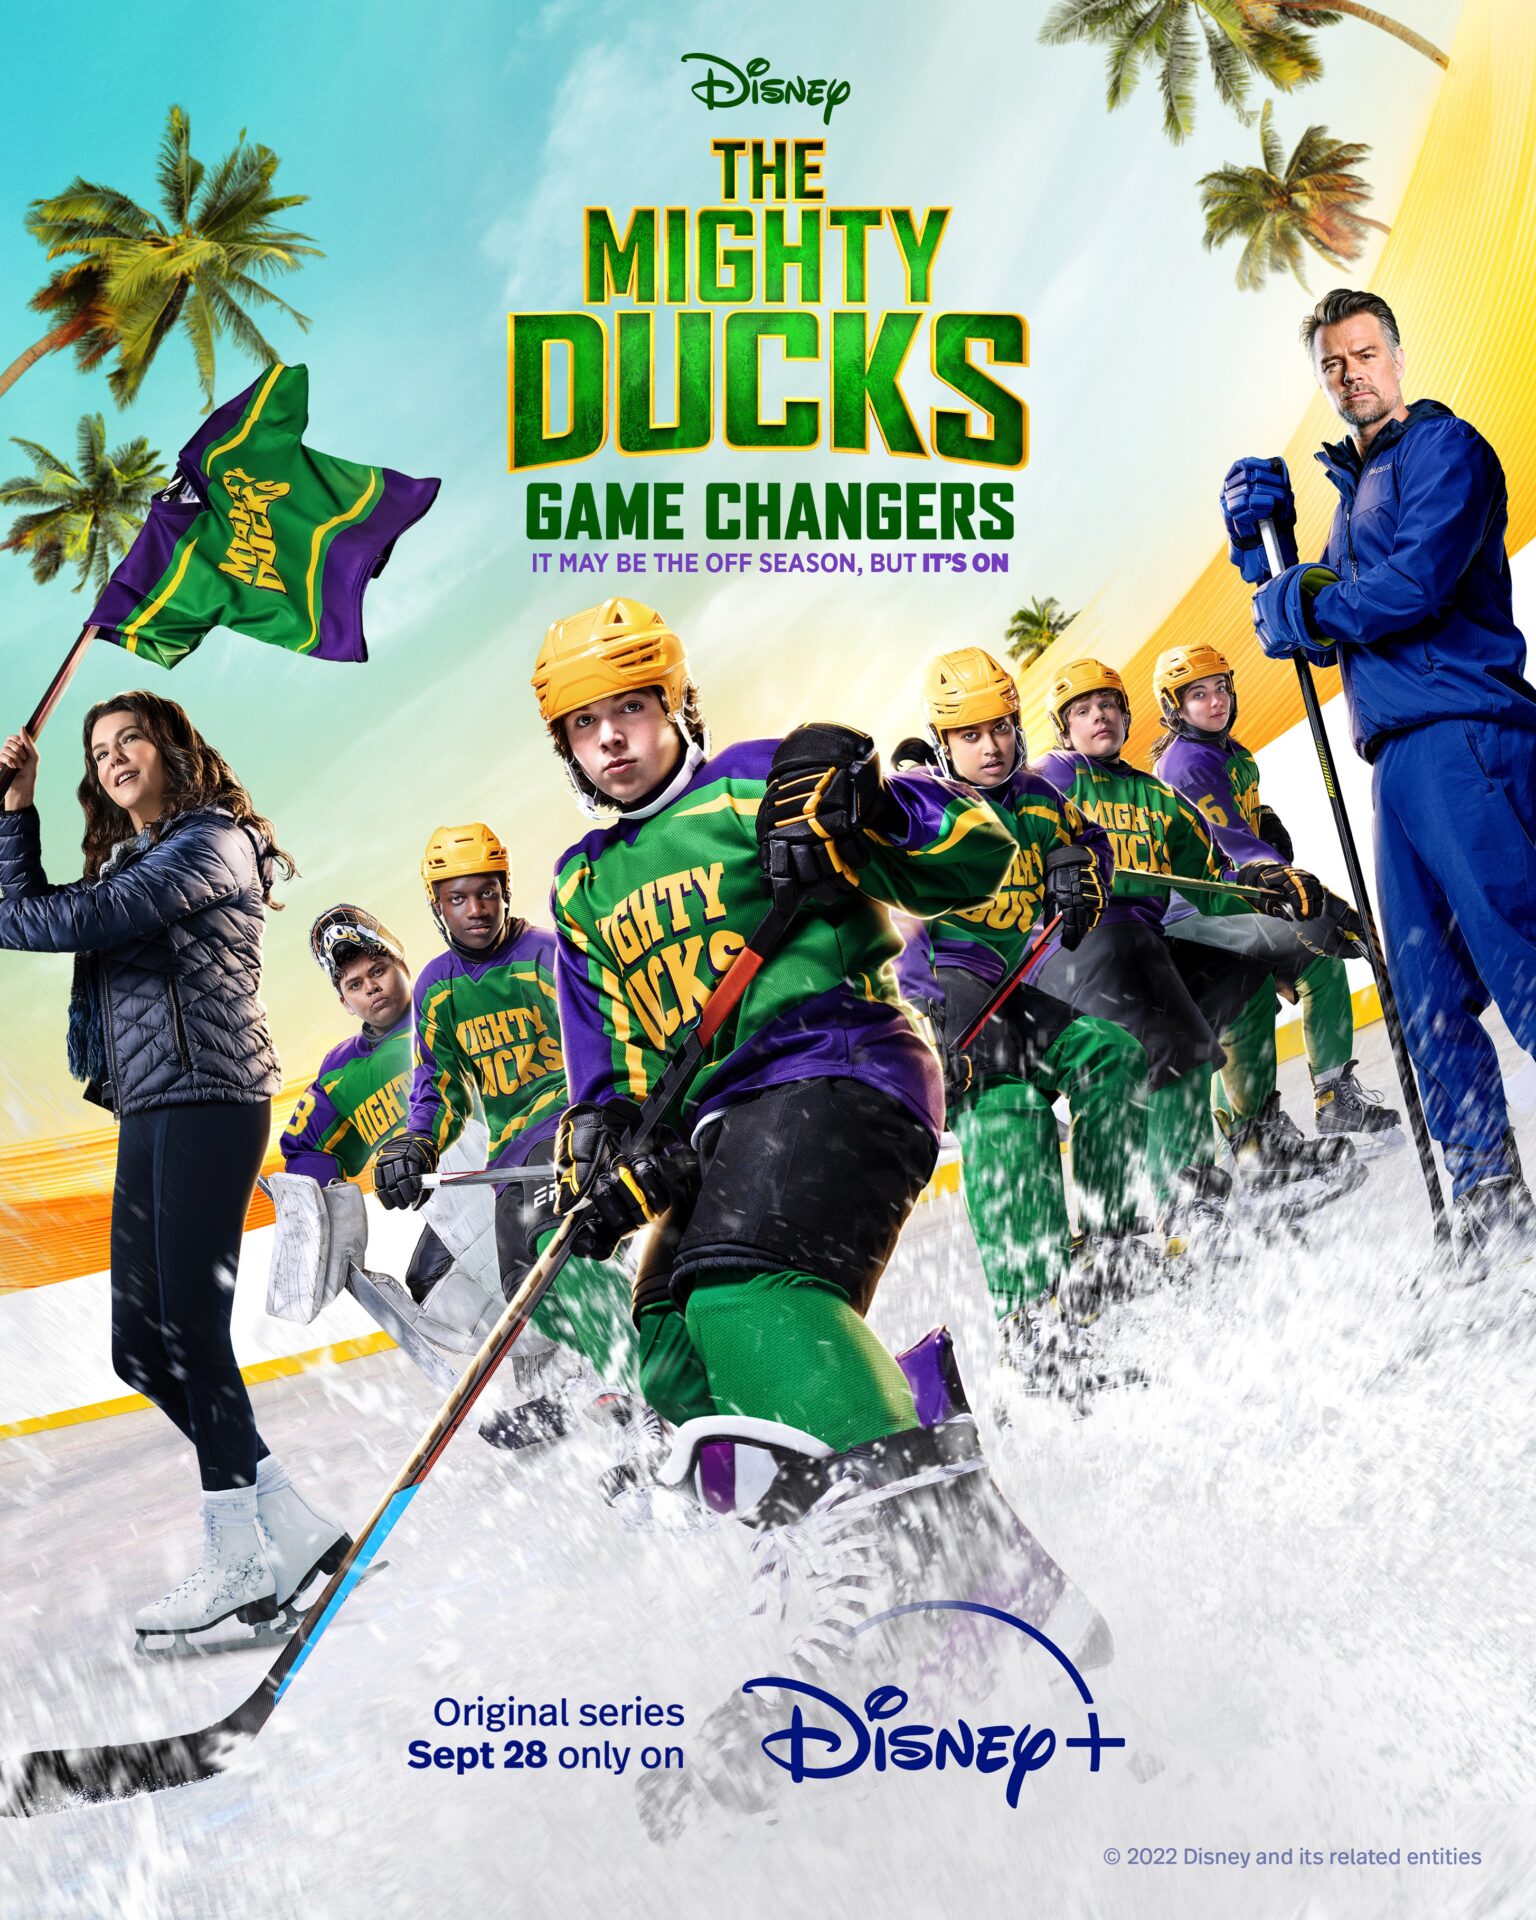 The Mighty Ducks: Game Changers fantasy draft, plus a review of